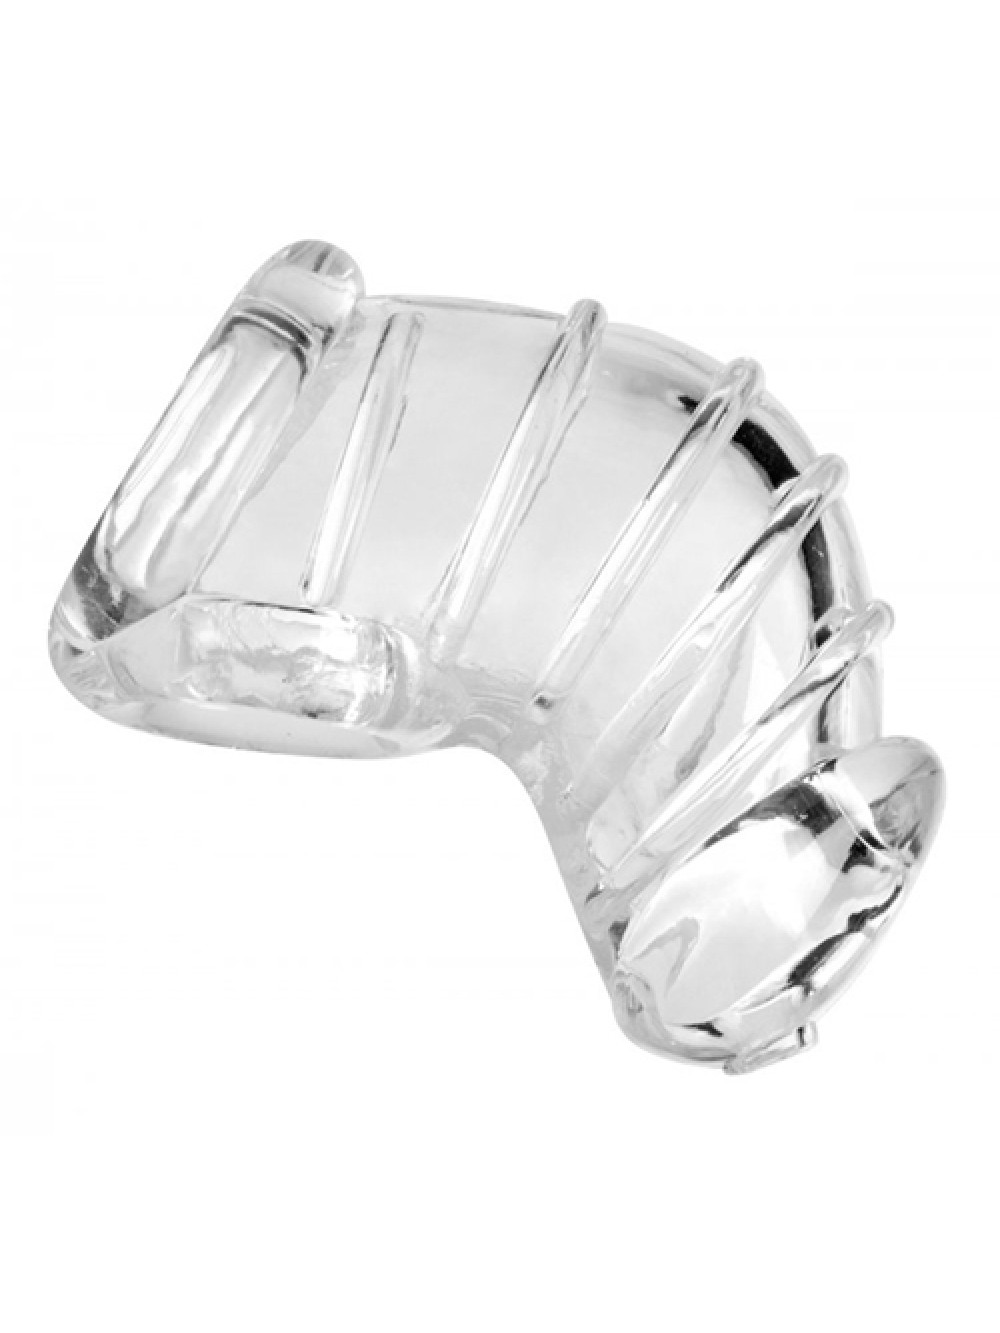 Detained Soft Body Chastity Cage 848518018977